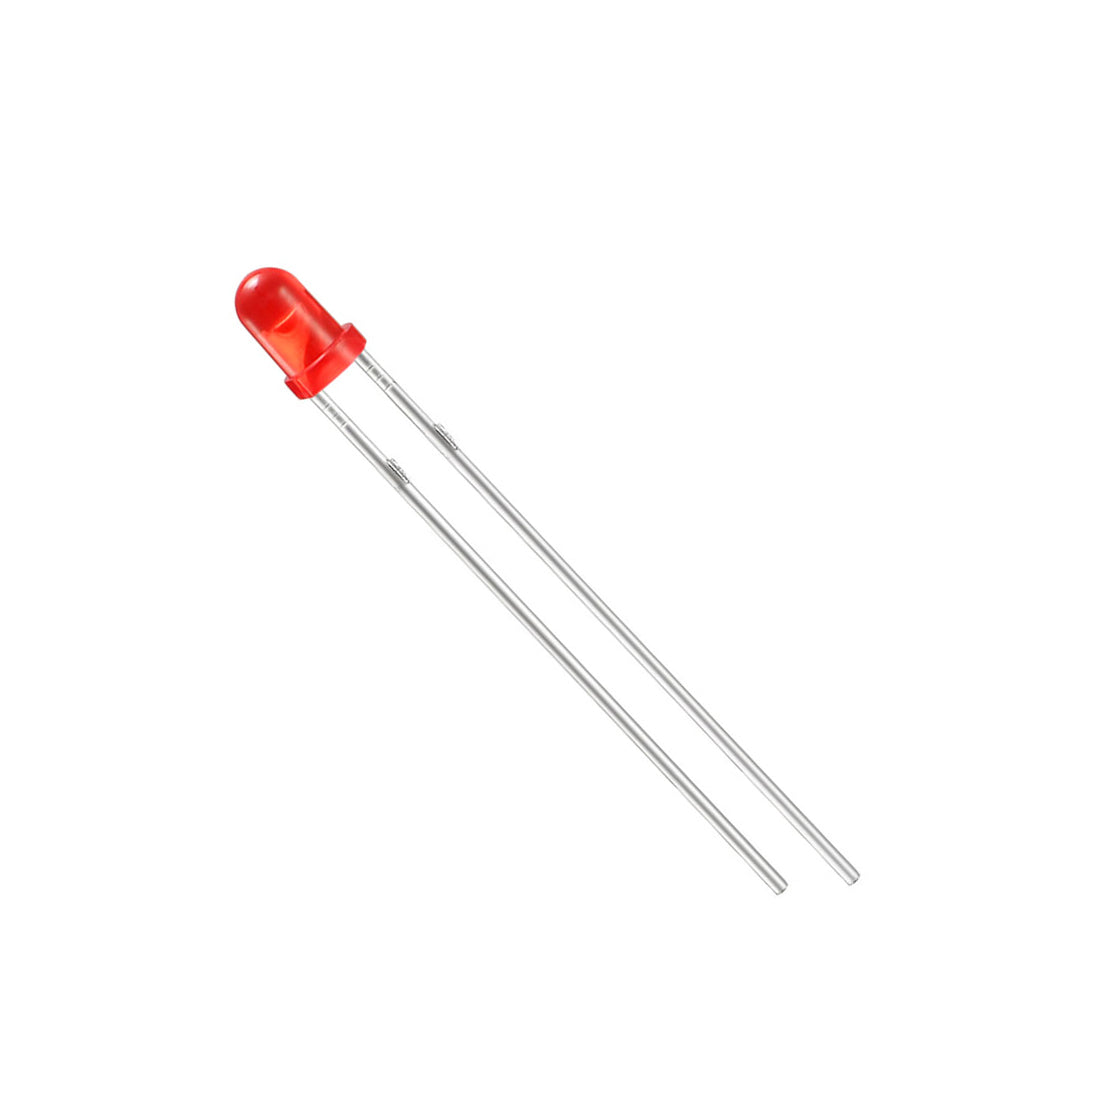 uxcell Uxcell 30pcs 3mm Red LED Diode Lights DC 1.8-2V Bulb Lamps Light Emitting Diode